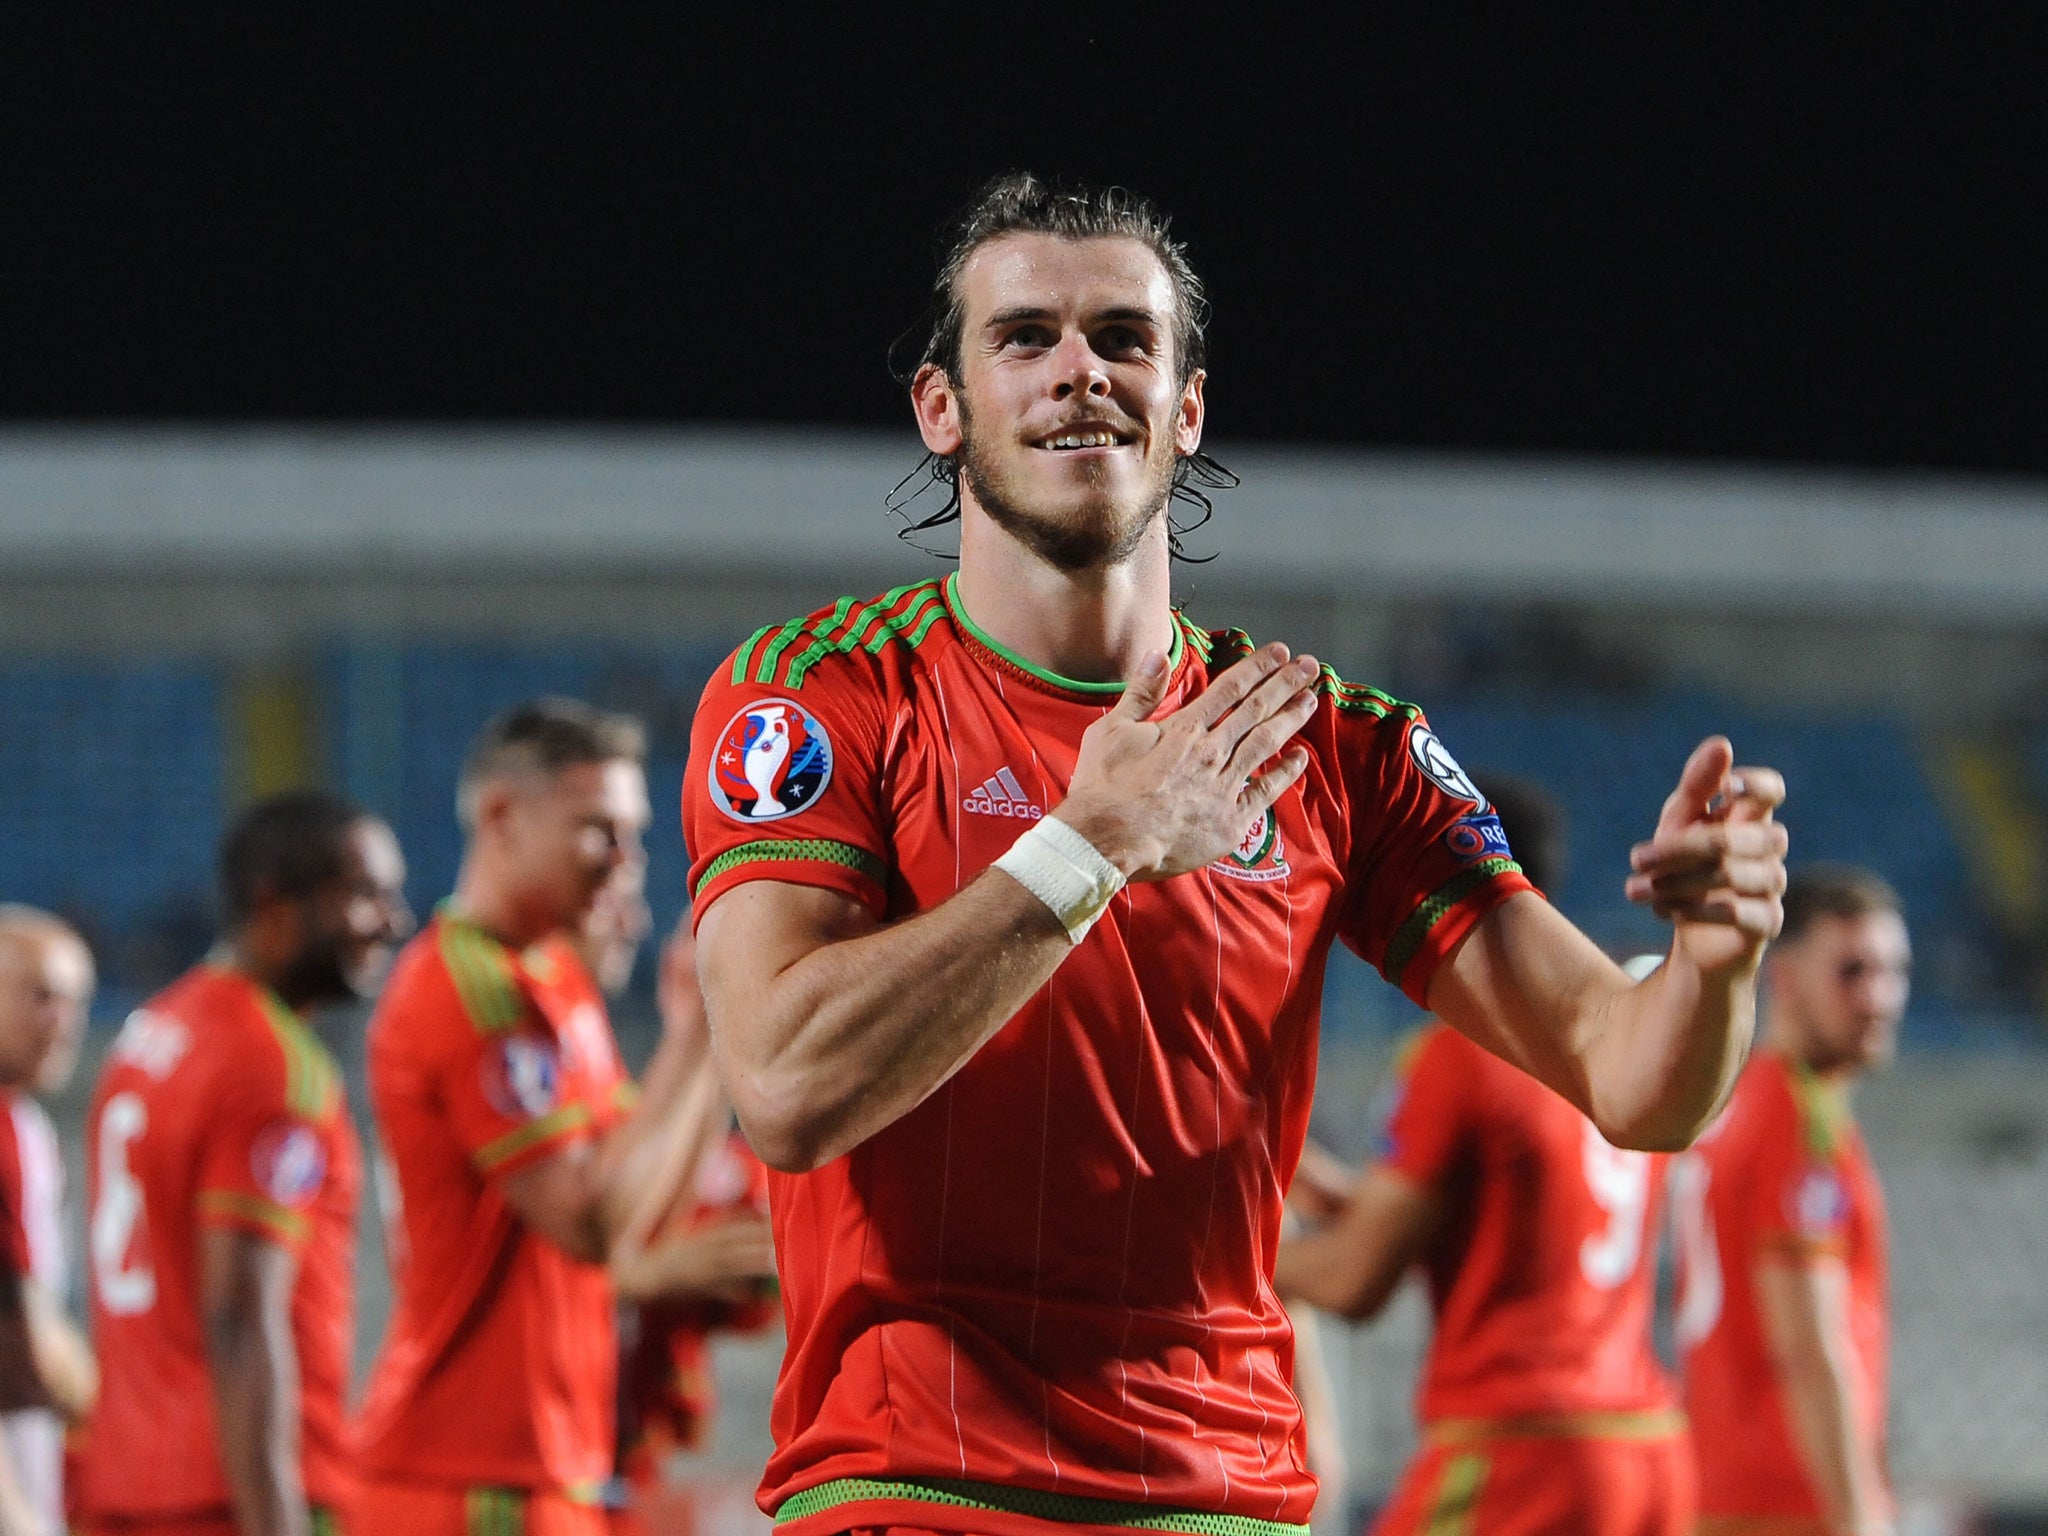 It would be nice if the mighty Gareth Bale and chums would throw their lot in with England